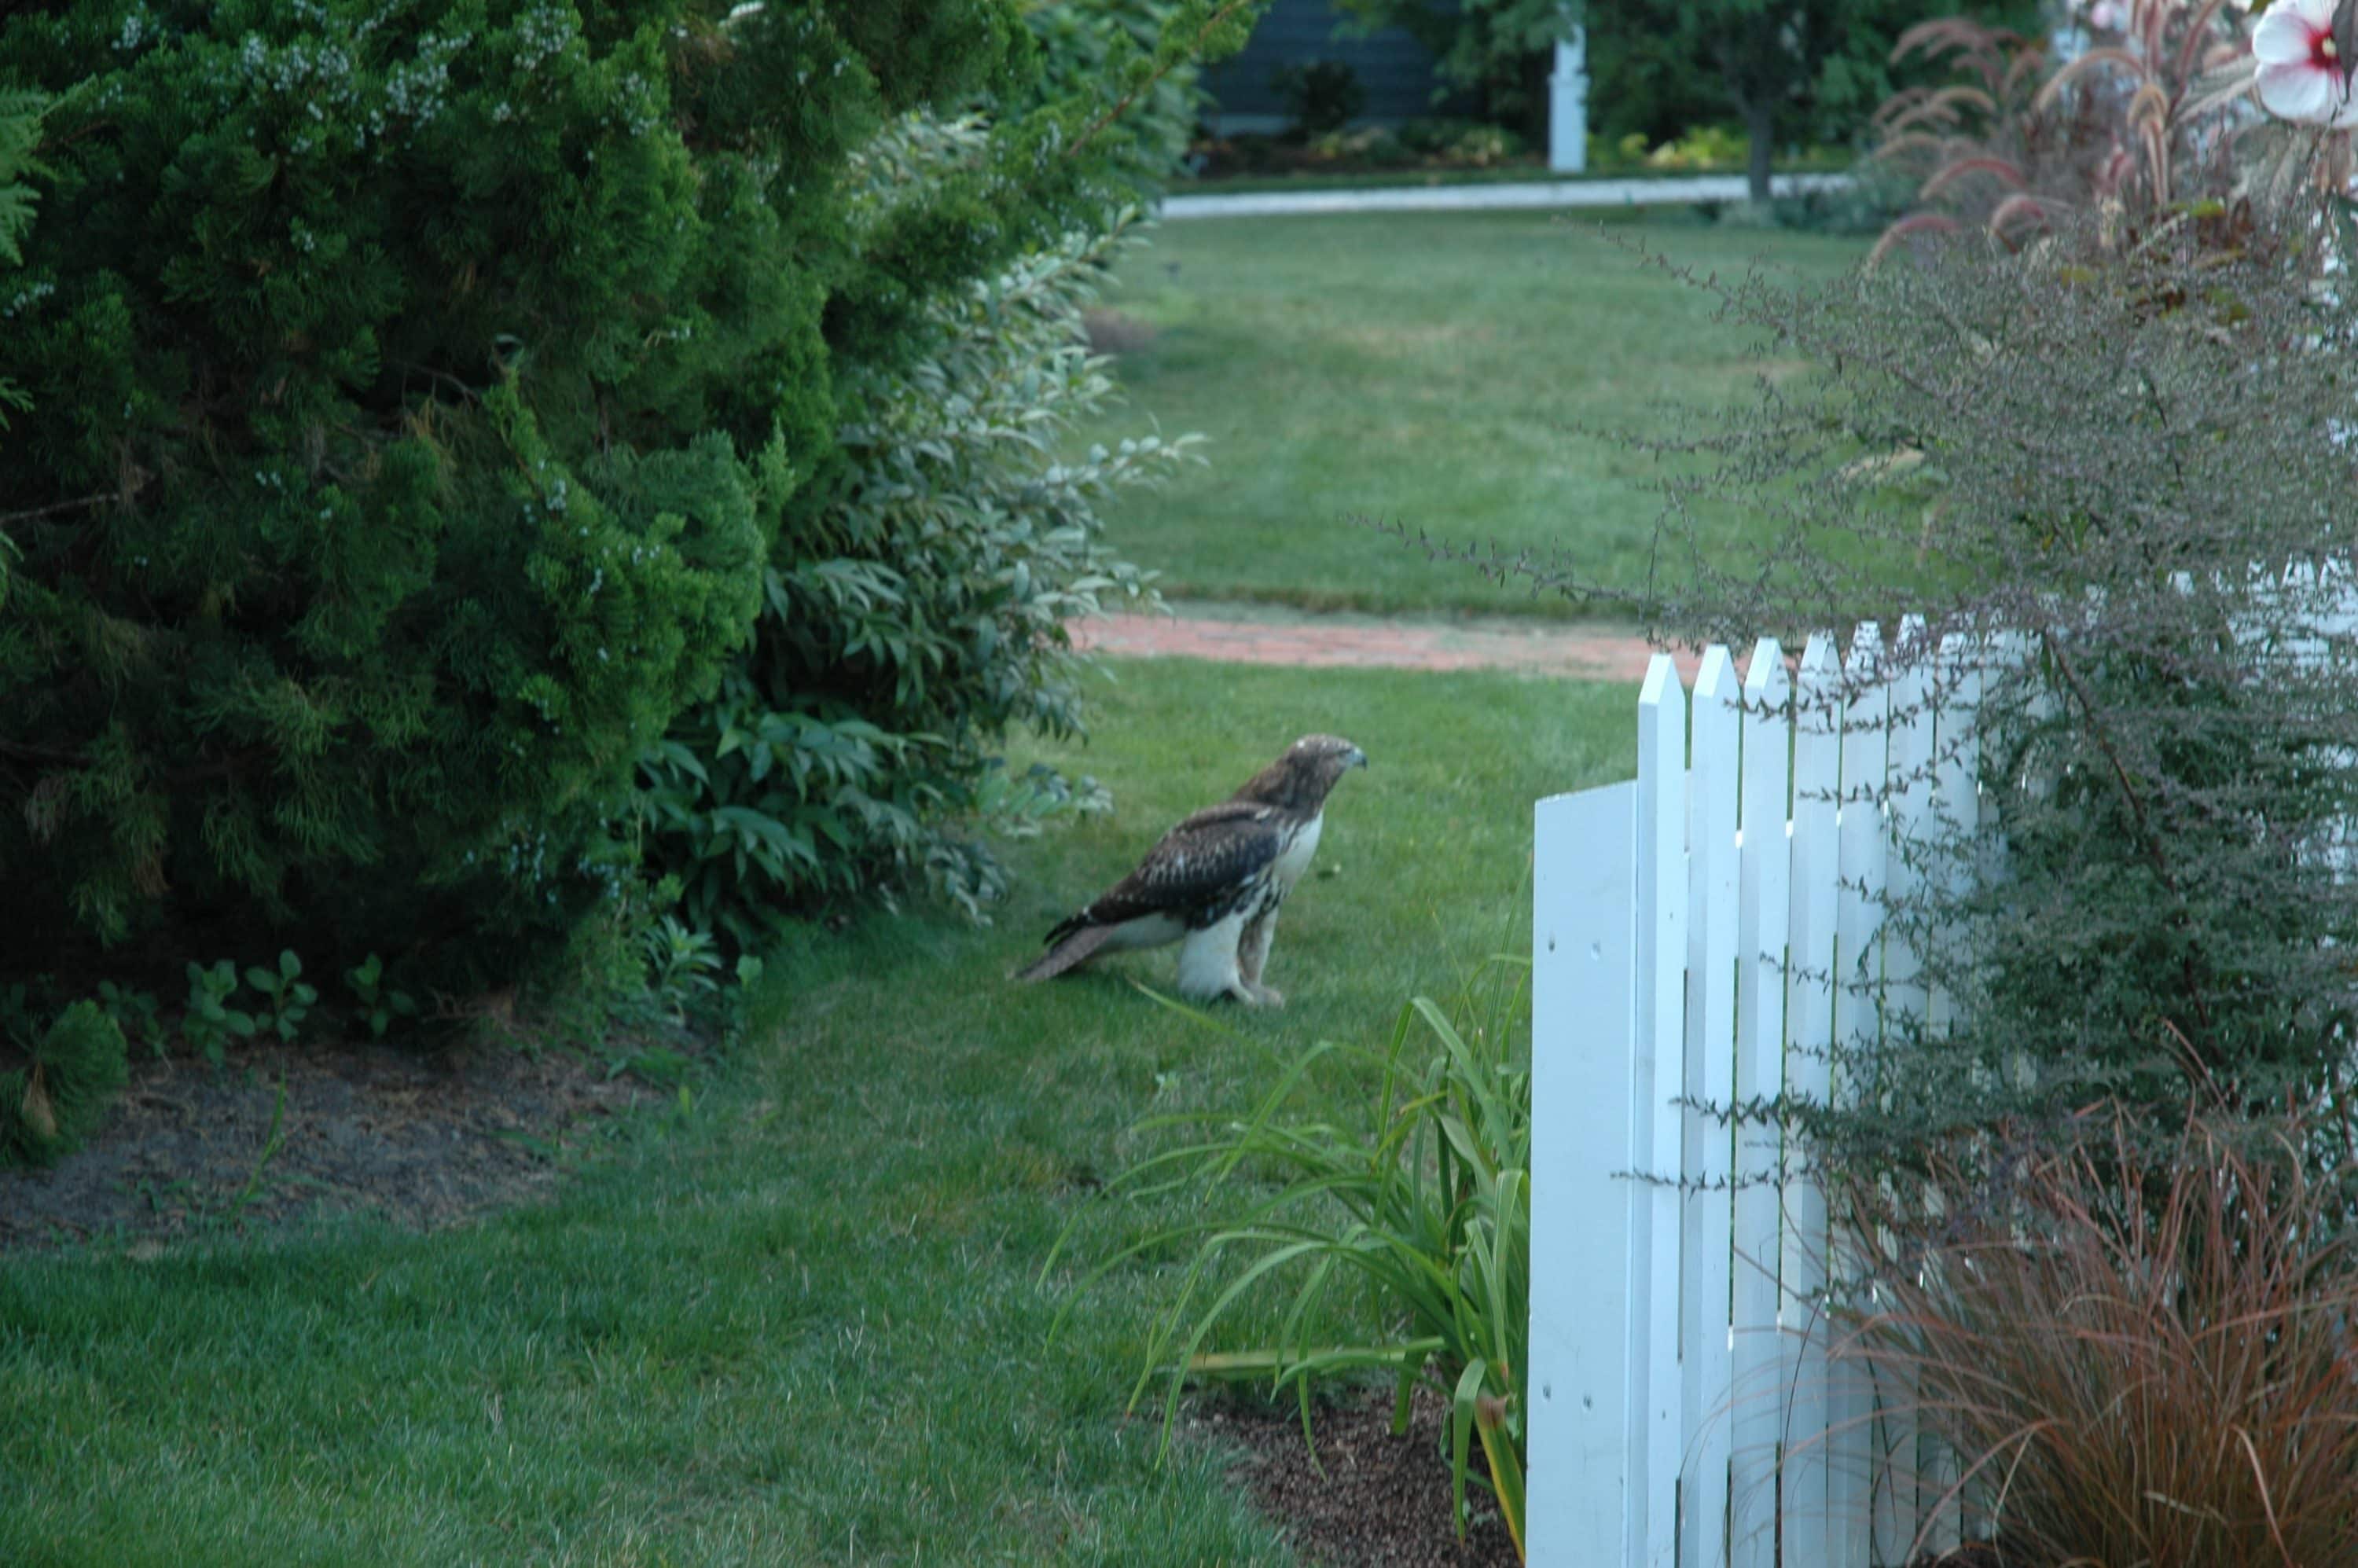 Red-Tailed Hawk in the front garden.